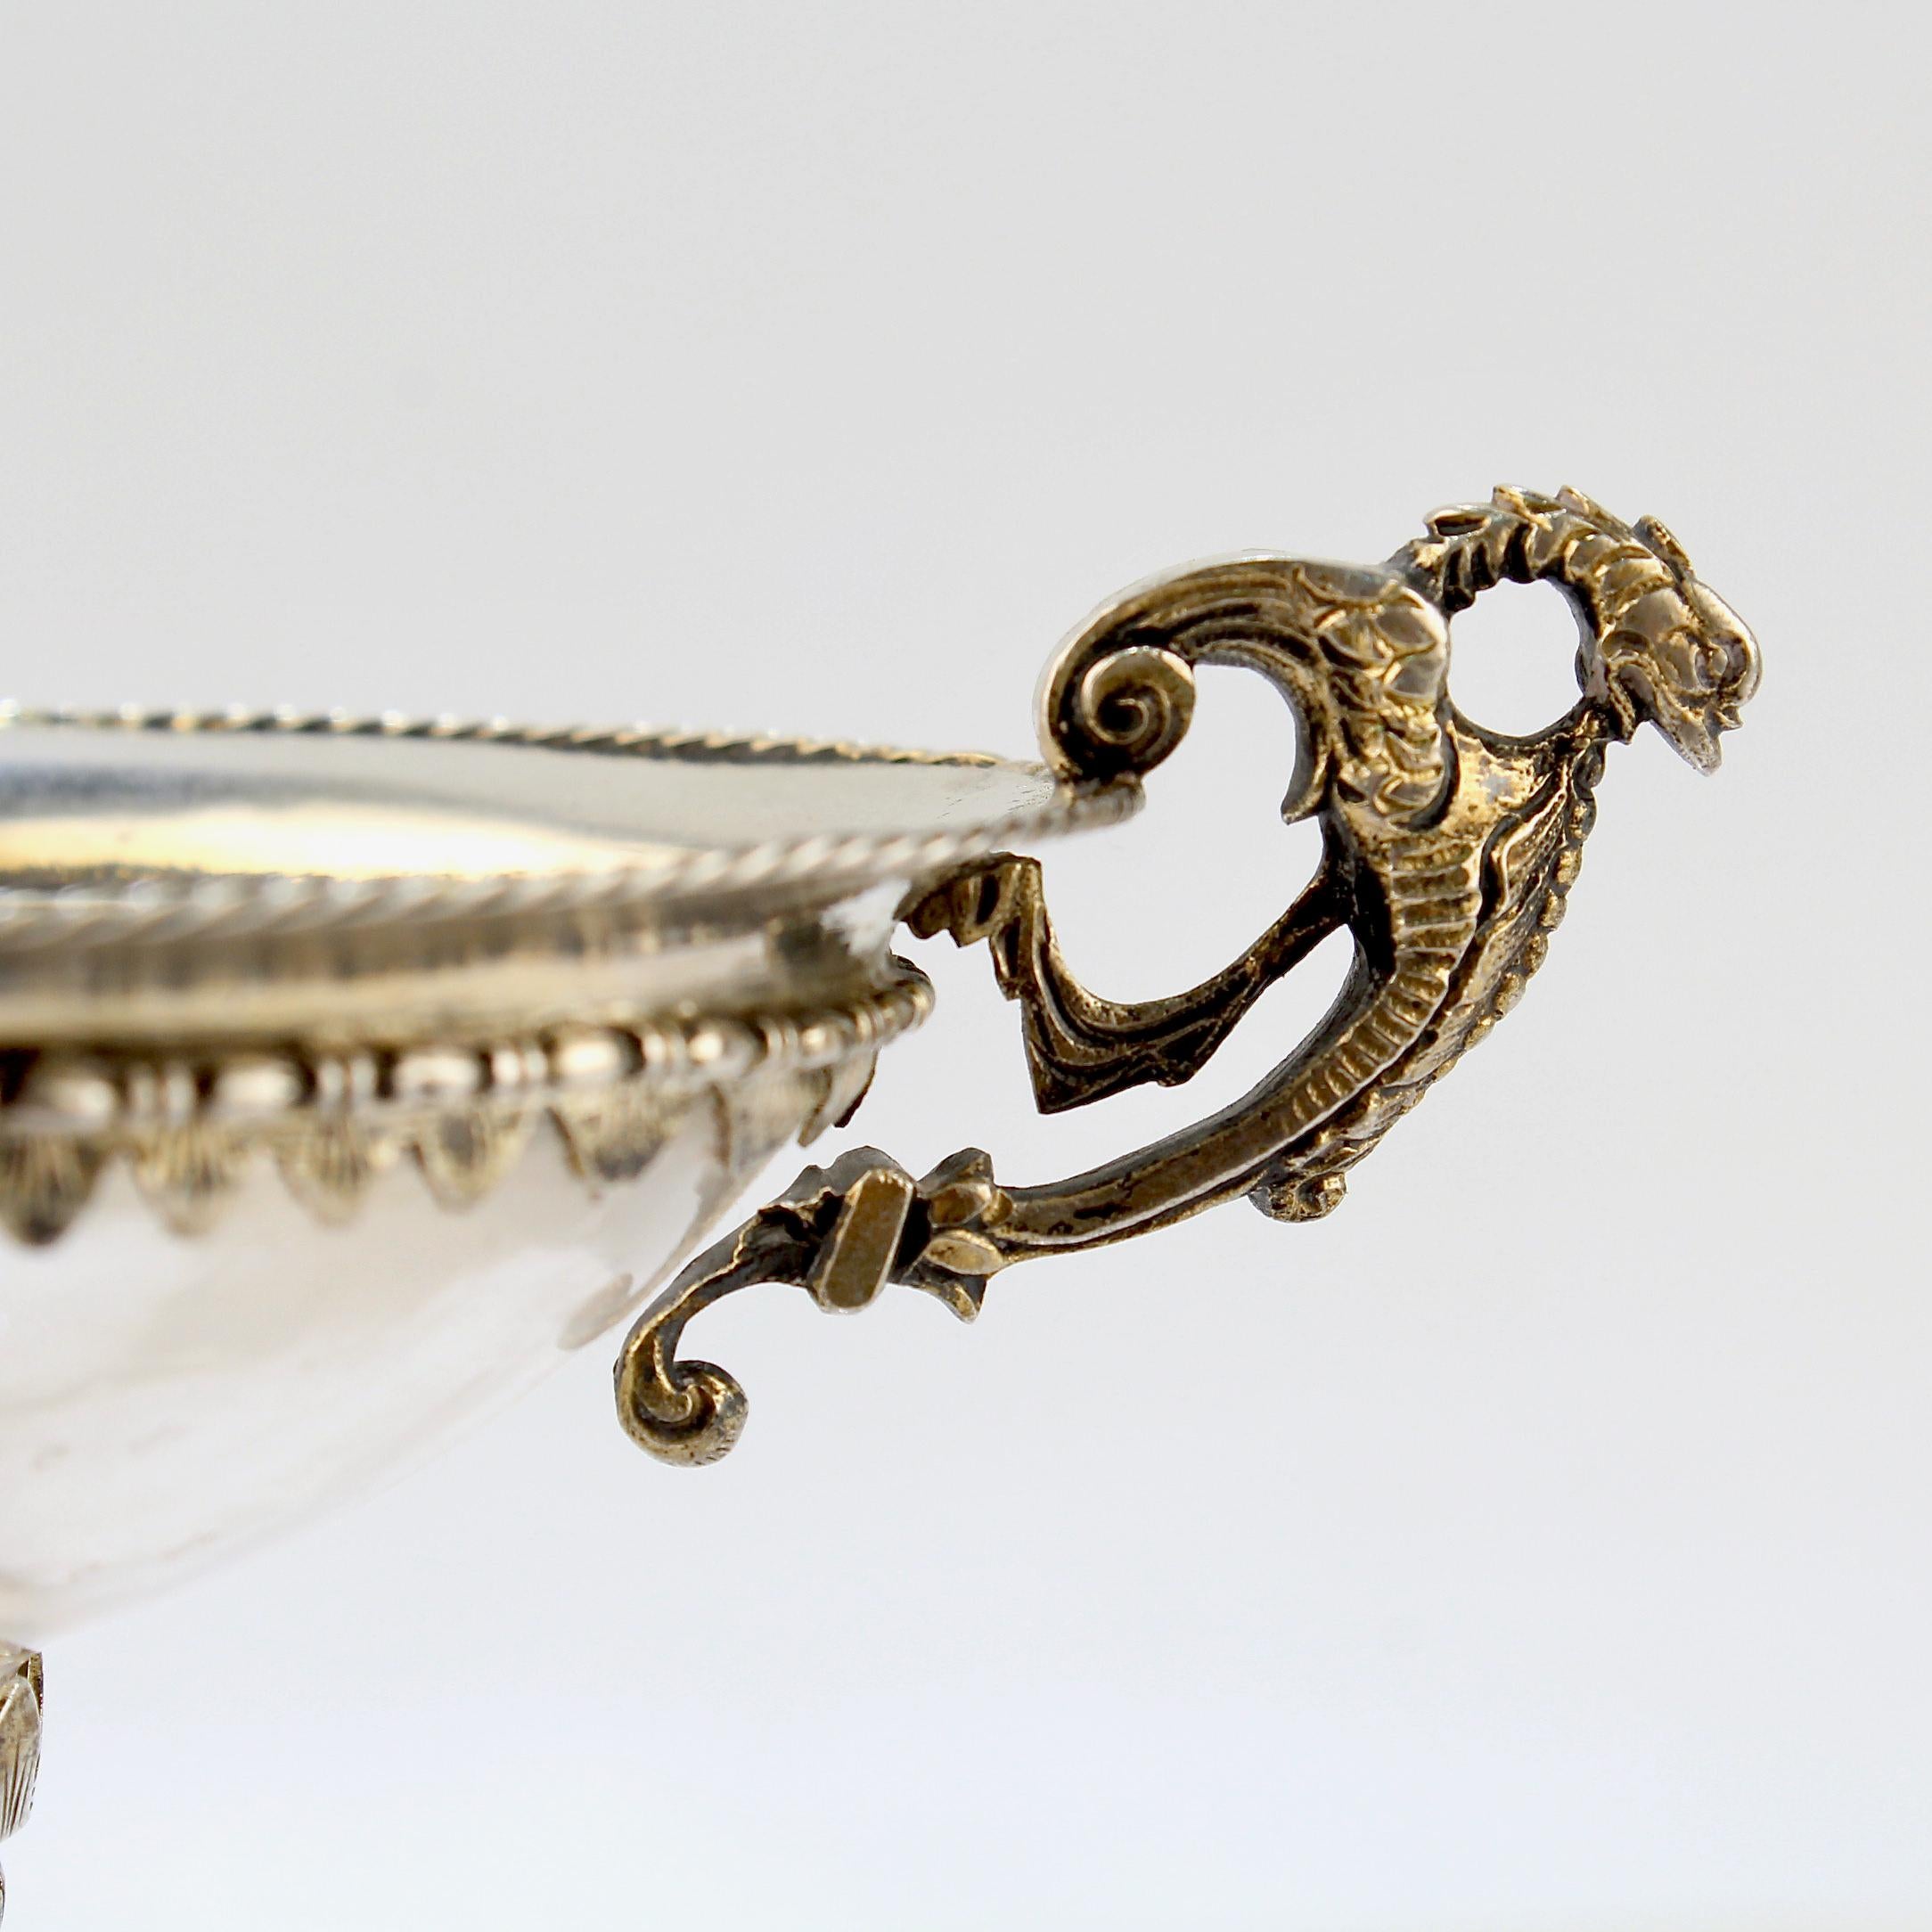 Uncut Antique 18th or 19th Century Austrian Silver Mounted Rock Crystal Salt Cellar For Sale